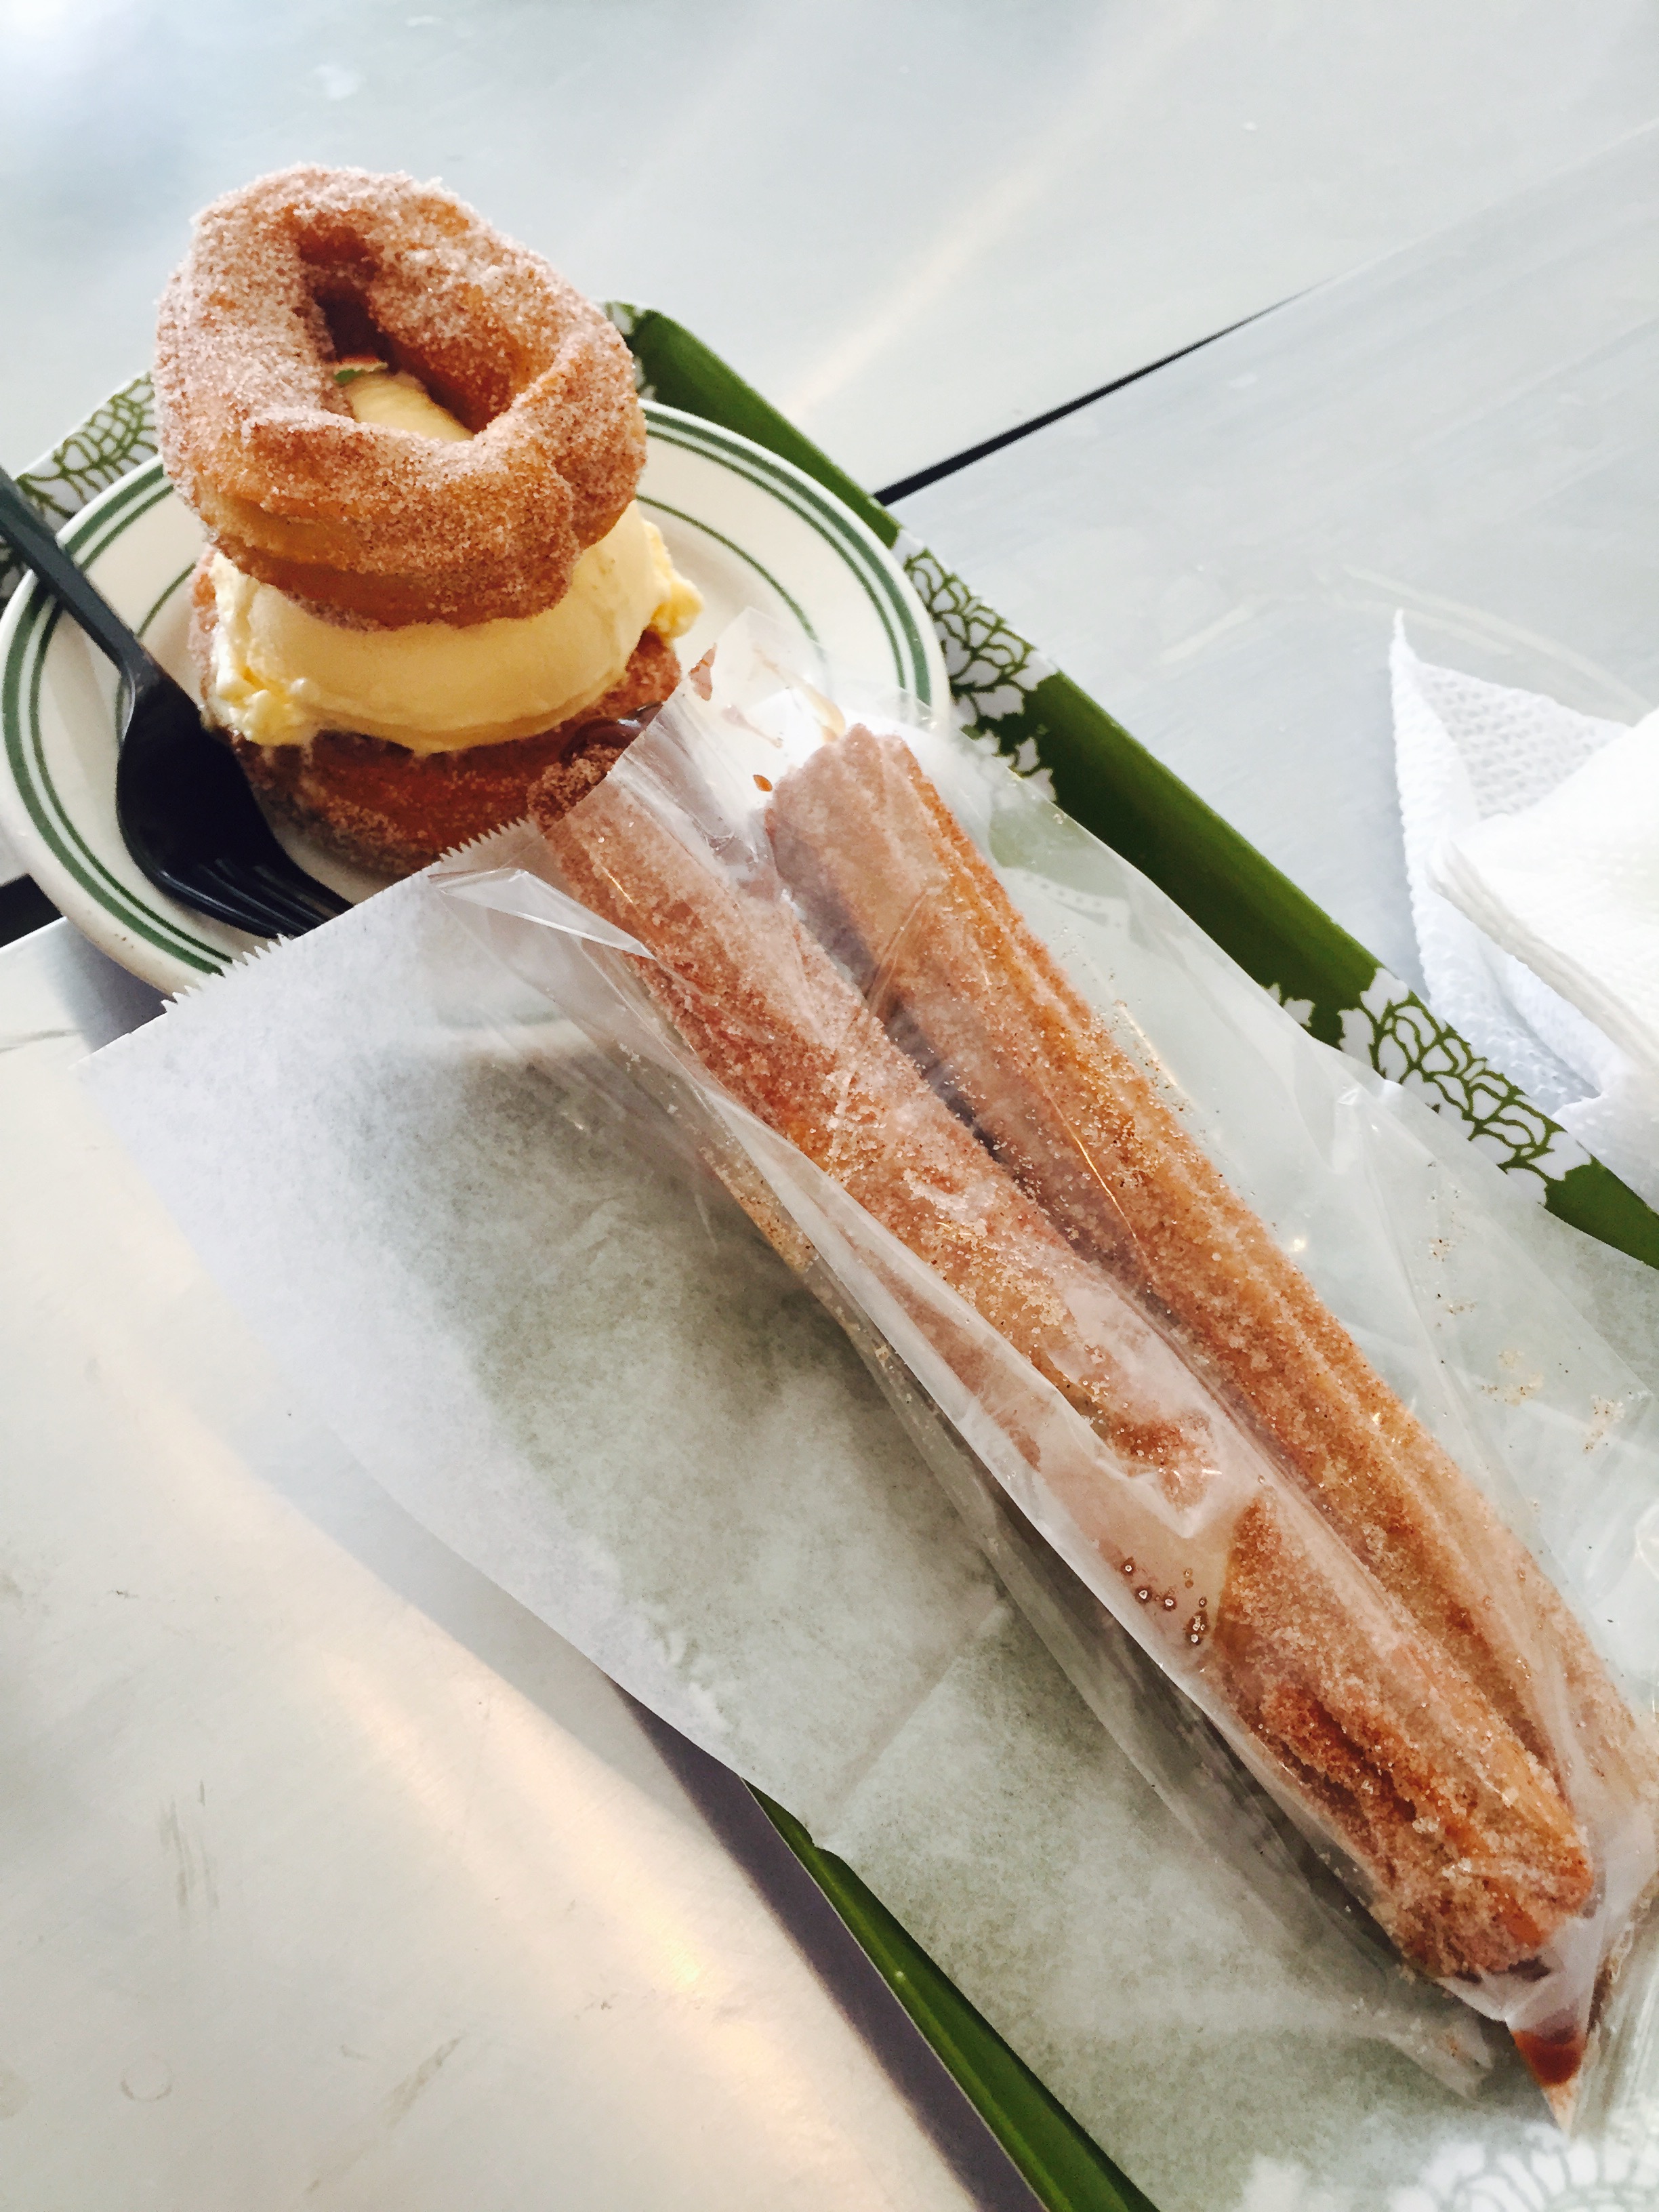 The Ultimate Churro: The Churro Relleno - Girls on Food